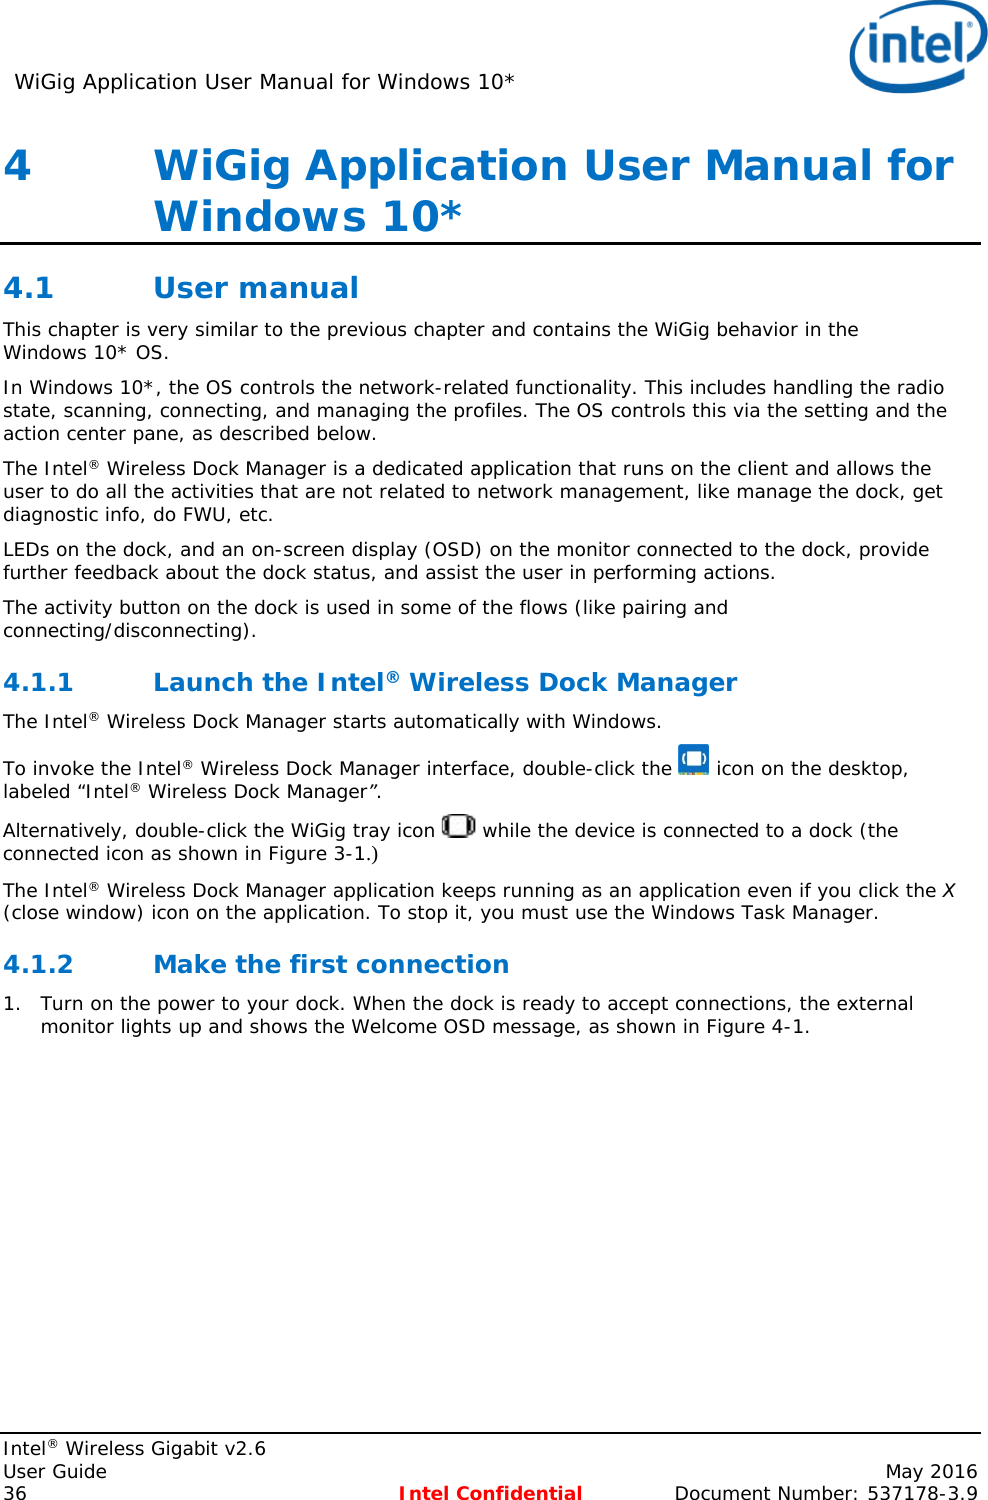 WiGig Application User Manual for Windows 10*    Intel® Wireless Gigabit v2.6 User Guide    May 2016 36 Intel Confidential Document Number: 537178-3.9 4   WiGig Application User Manual for Windows 10* 4.1 User manual This chapter is very similar to the previous chapter and contains the WiGig behavior in the Windows 10* OS. In Windows 10*, the OS controls the network-related functionality. This includes handling the radio state, scanning, connecting, and managing the profiles. The OS controls this via the setting and the action center pane, as described below. The Intel® Wireless Dock Manager is a dedicated application that runs on the client and allows the user to do all the activities that are not related to network management, like manage the dock, get diagnostic info, do FWU, etc. LEDs on the dock, and an on-screen display (OSD) on the monitor connected to the dock, provide further feedback about the dock status, and assist the user in performing actions. The activity button on the dock is used in some of the flows (like pairing and connecting/disconnecting). 4.1.1 Launch the Intel® Wireless Dock Manager The Intel® Wireless Dock Manager starts automatically with Windows. To invoke the Intel® Wireless Dock Manager interface, double-click the   icon on the desktop, labeled “Intel® Wireless Dock Manager”. Alternatively, double-click the WiGig tray icon   while the device is connected to a dock (the connected icon as shown in Figure 3-1 ).  The Intel® Wireless Dock Manager application keeps running as an application even if you click the X (close window) icon on the application. To stop it, you must use the Windows Task Manager. 4.1.2 Make the first connection 1. Turn on the power to your dock. When the dock is ready to accept connections, the external monitor lights up and shows the Welcome OSD message, as shown in Figure 4-1. 